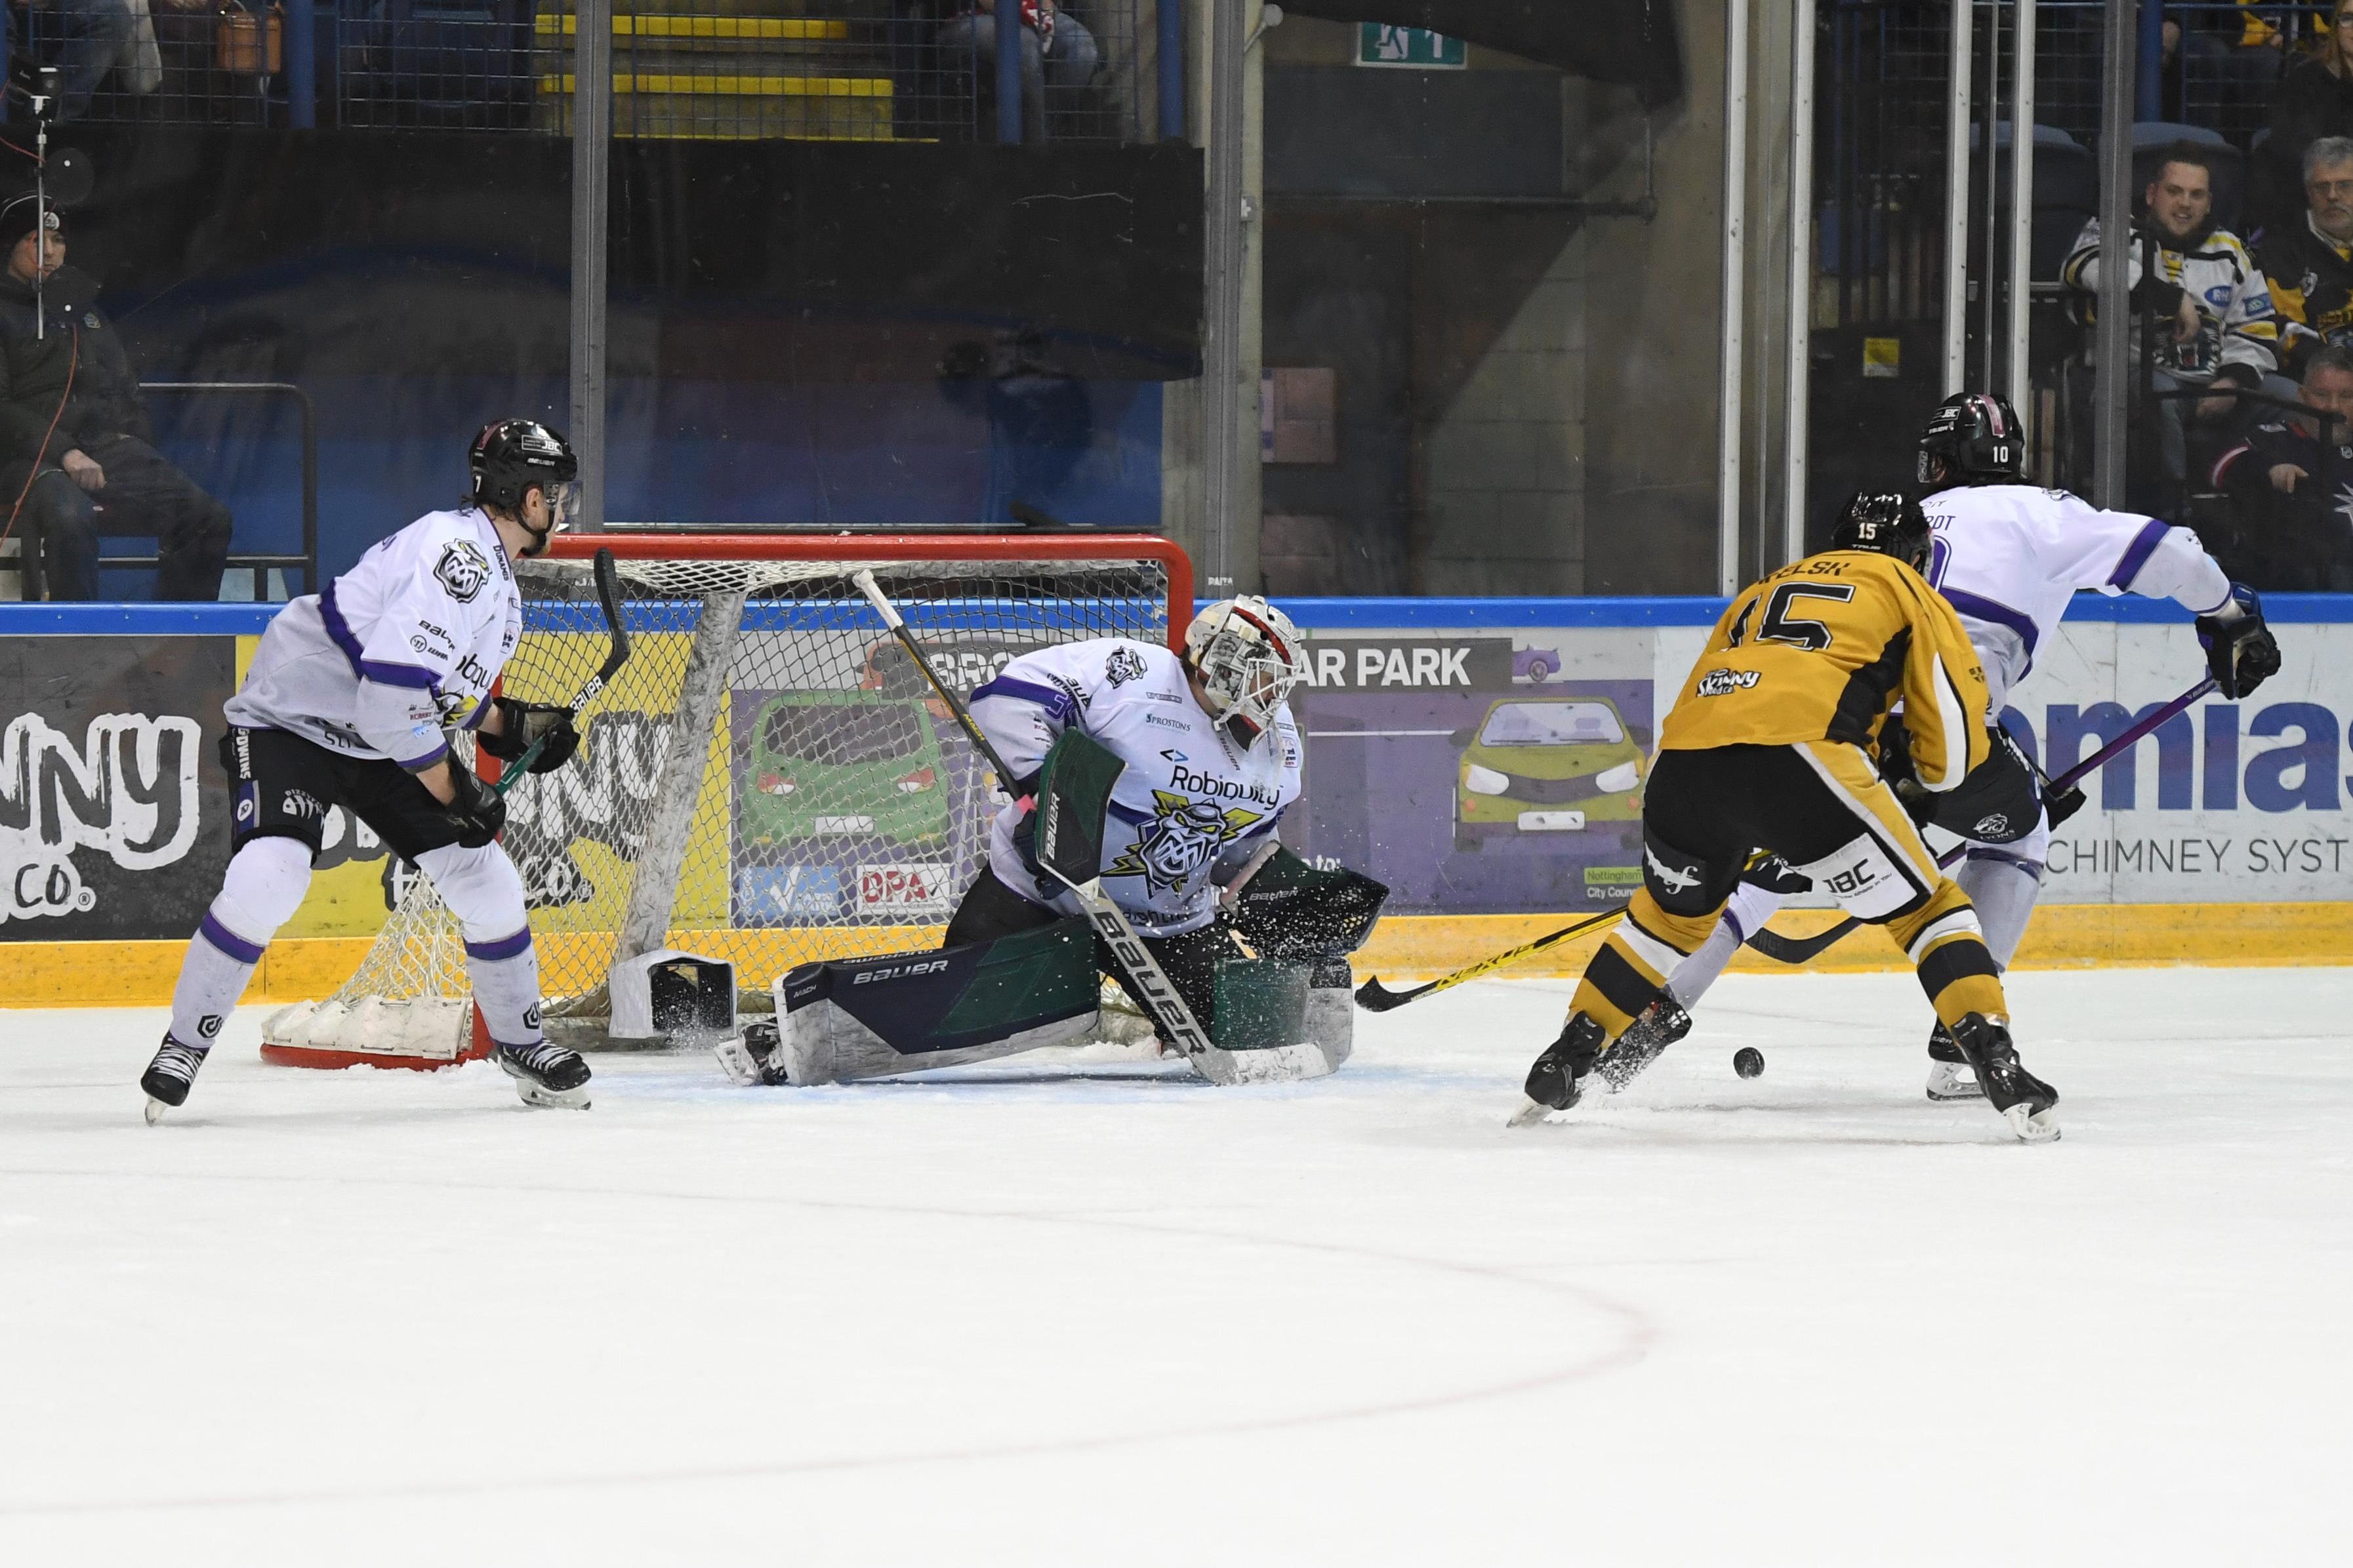 HIGHLIGHTS FROM SATURDAY'S THRILLER WITH STORM Top Image